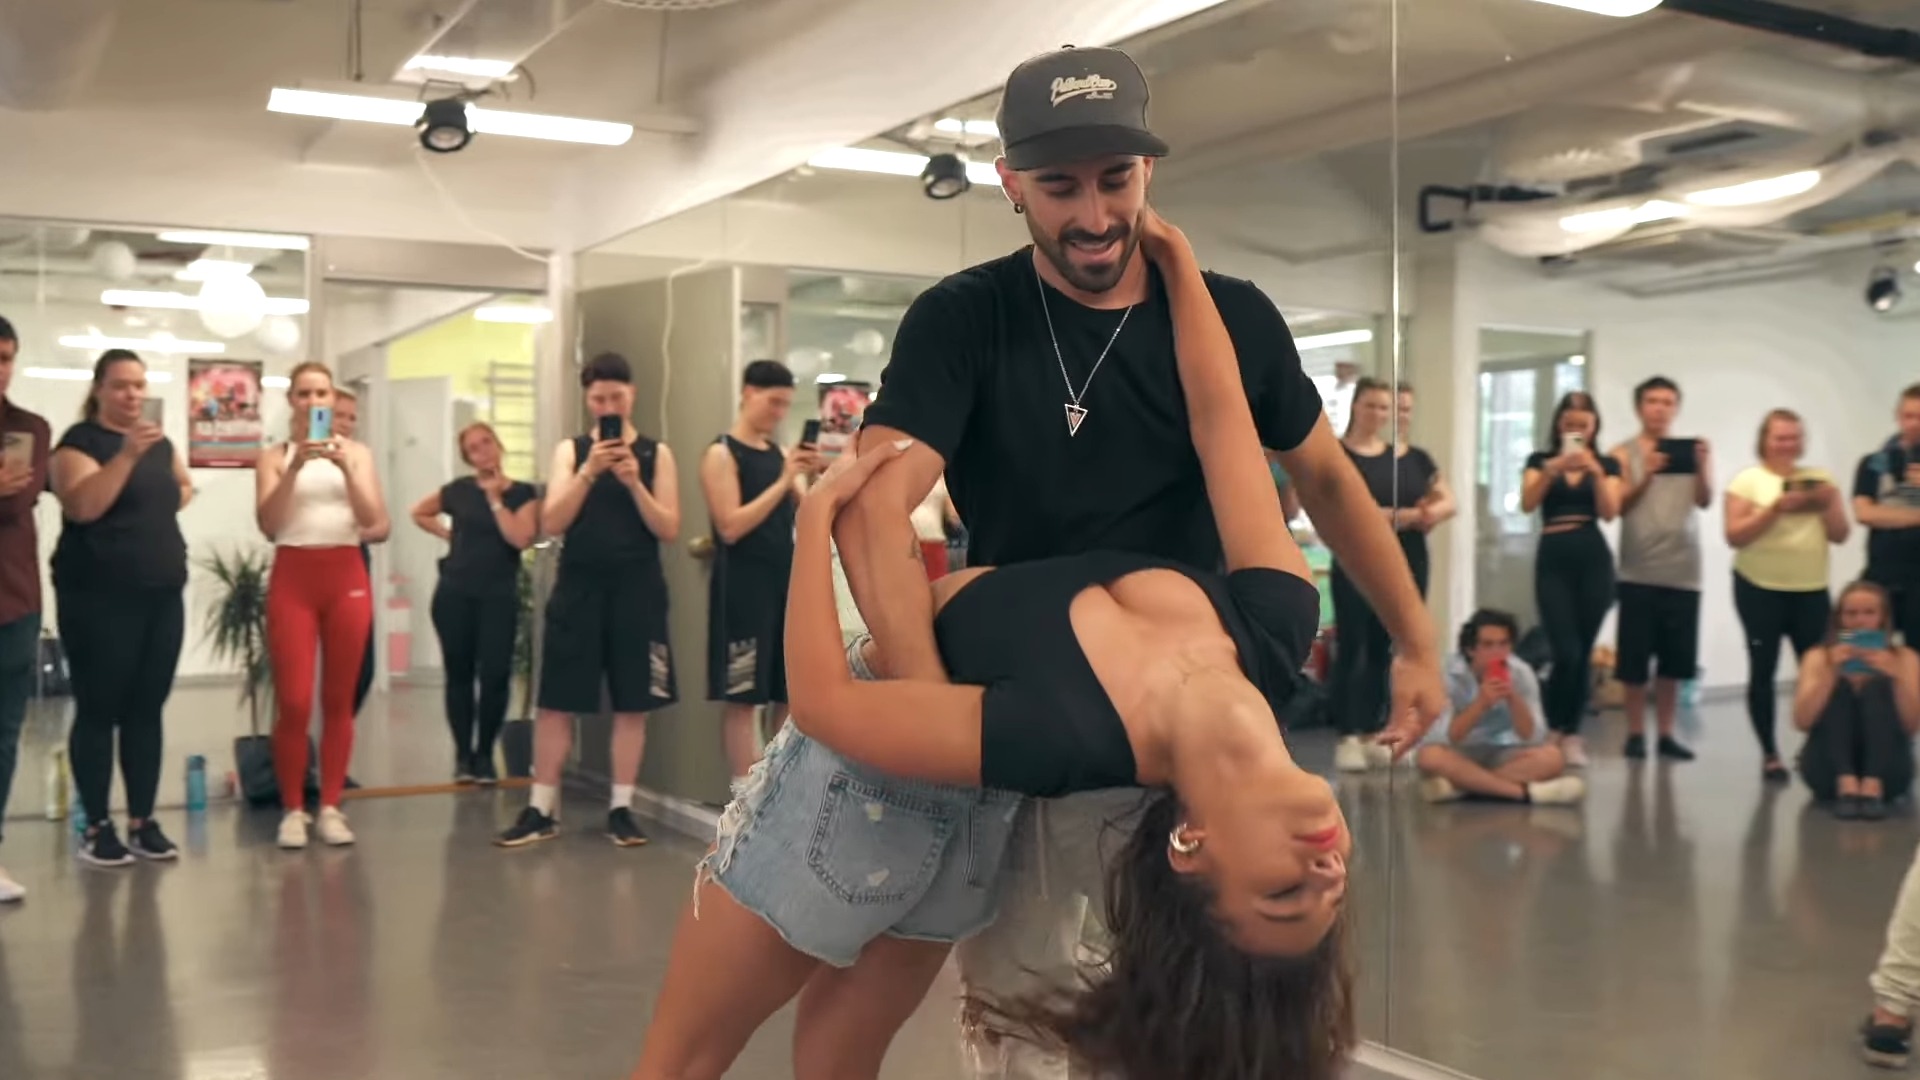 Man and woman dancing bachata in front of their dance students in the studio